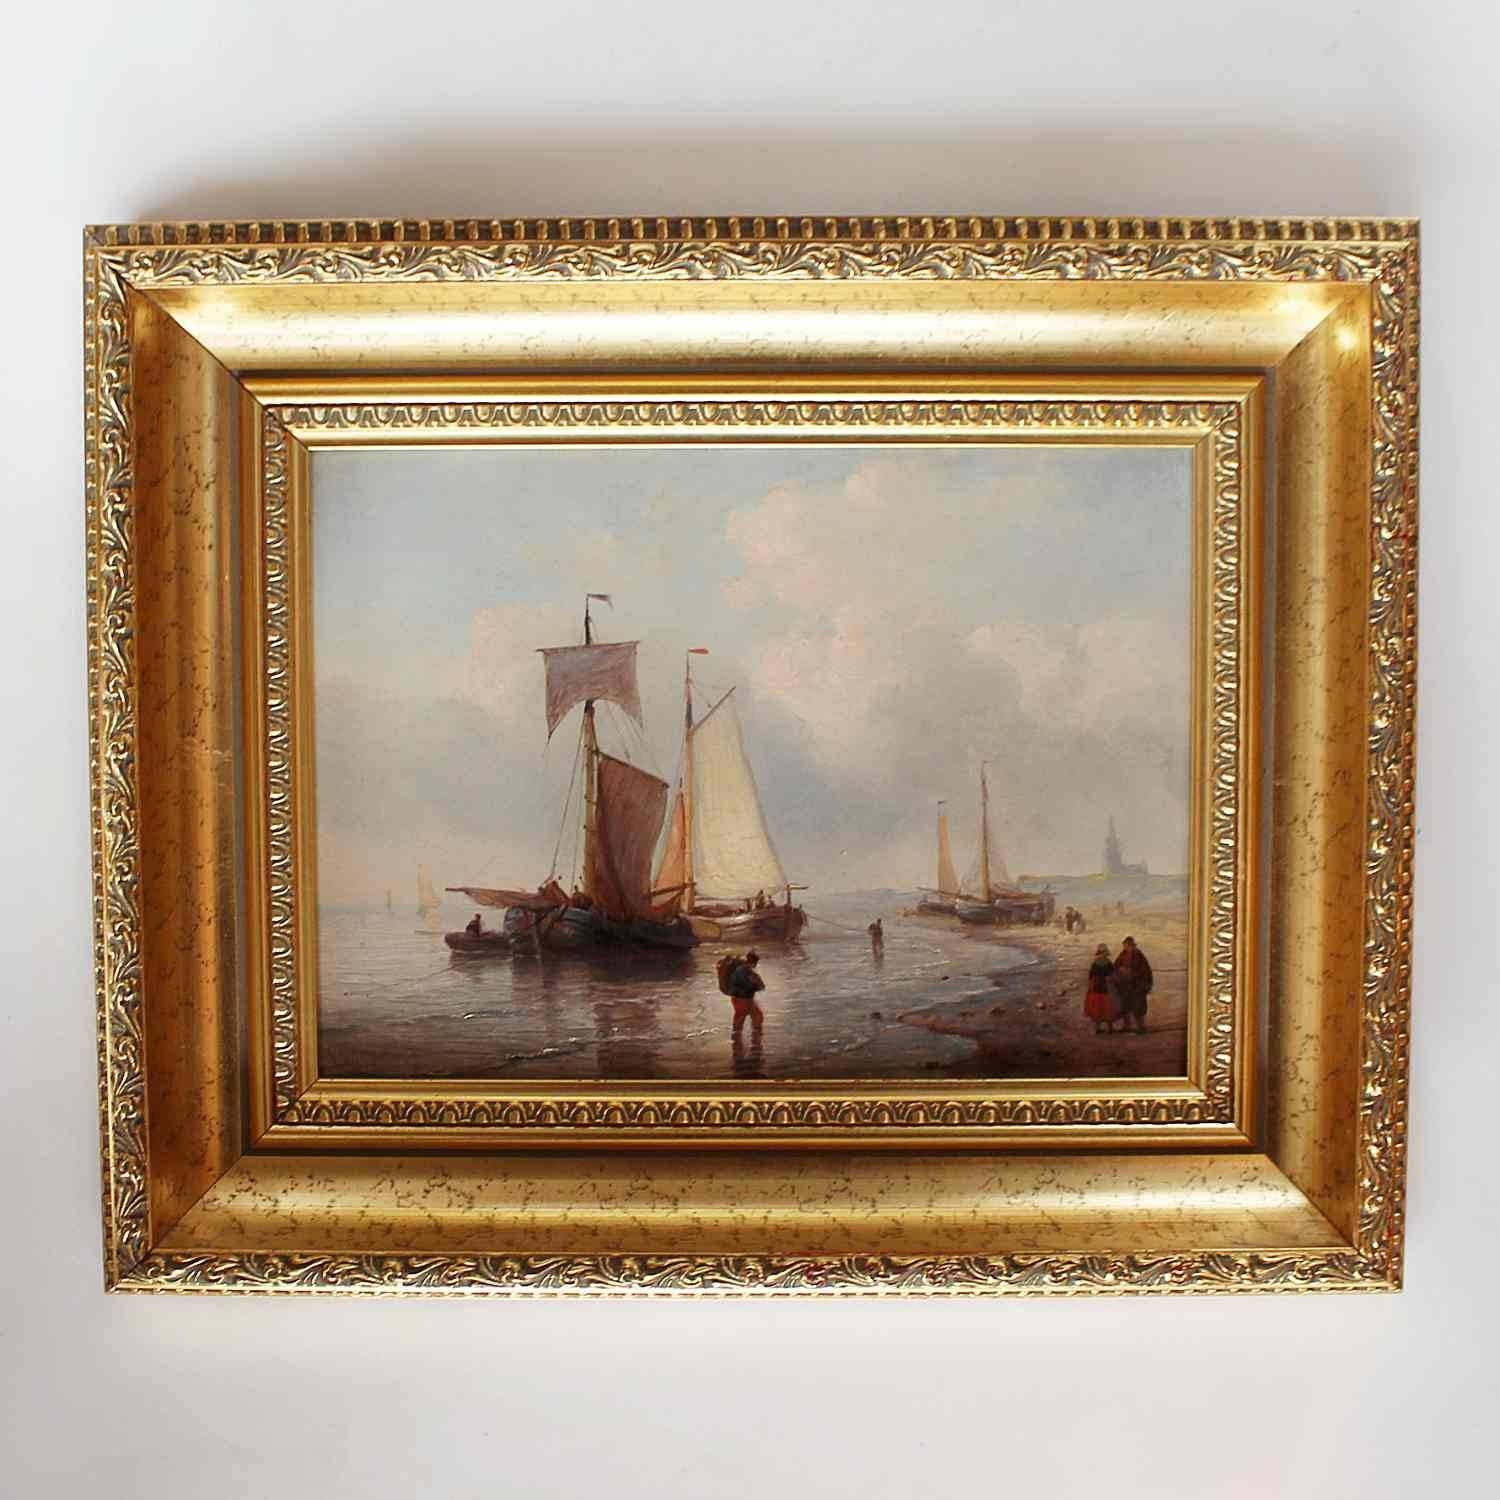 'Fishing Boats on the Shore', an oil on board study of Dutch fishing boats off the shore of Scheveningen beach. Signed G.W. Opdenhoff to lower left. Set in a later gilt frame. 

George Willem Opdenhoff was born in 1807 in Fulda Netherlands. He was